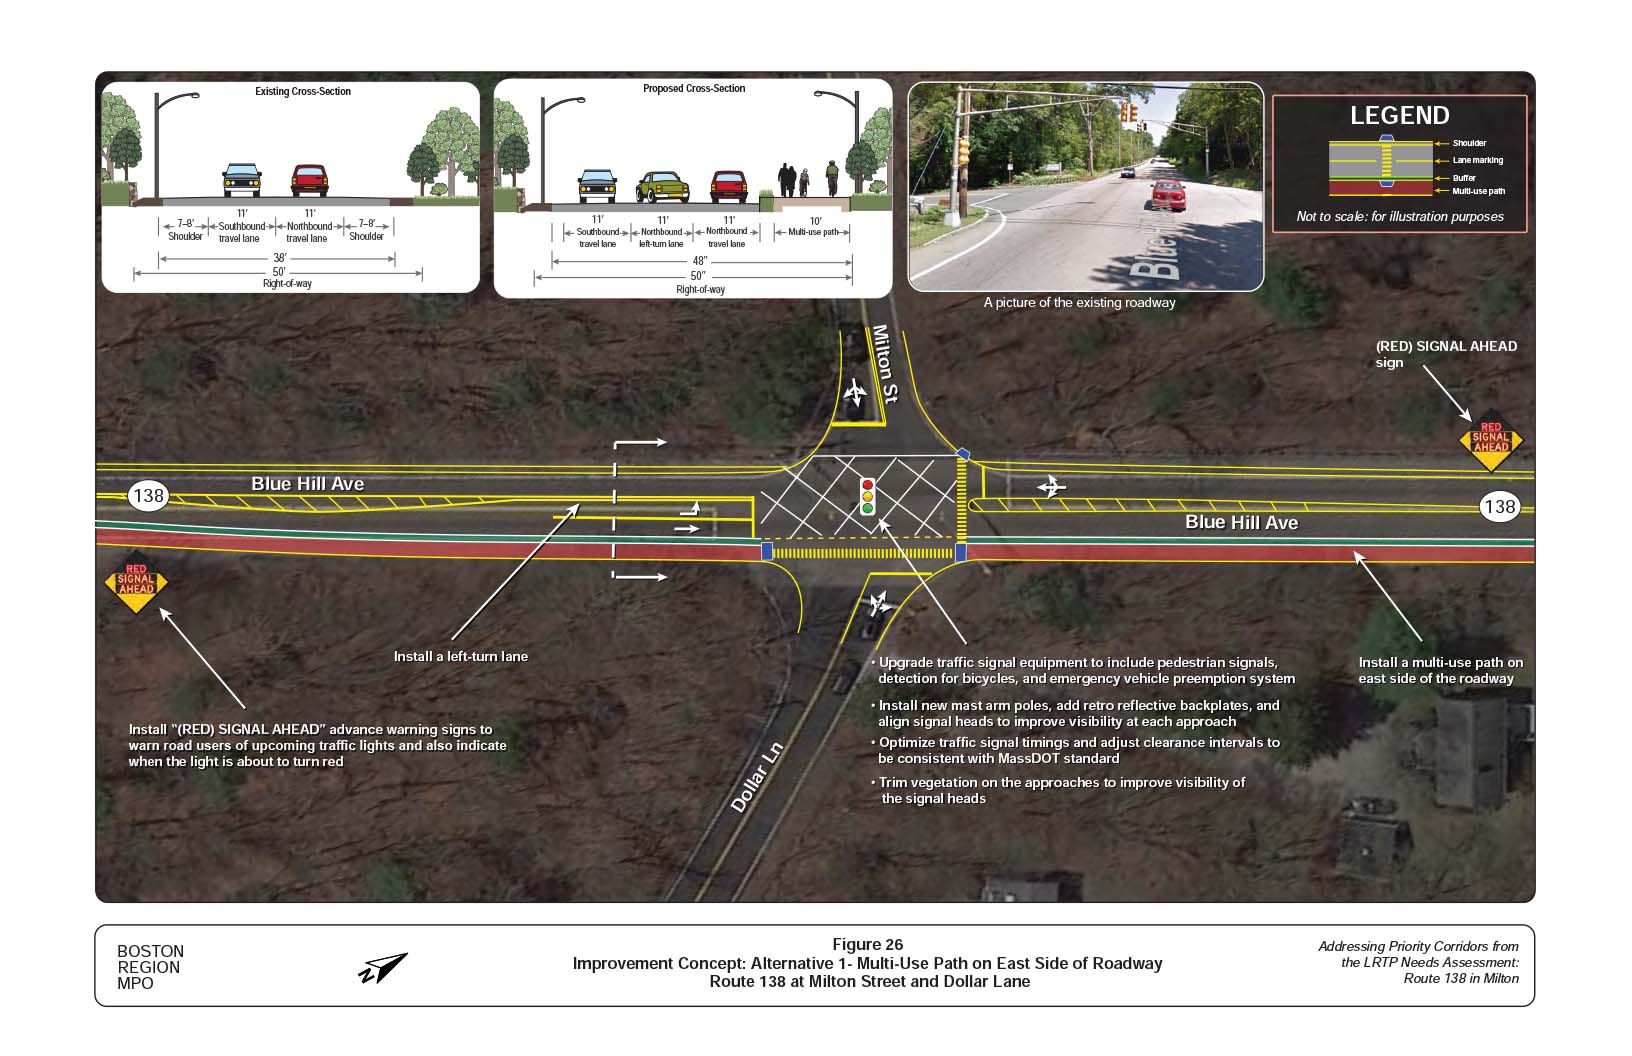 Figure 26 is an aerial photo of Route 138 at Milton Street/Dollar Lane showing Alternative 1, a multi-use path on the east side of the roadway, and overlays showing the existing and proposed cross-sections.